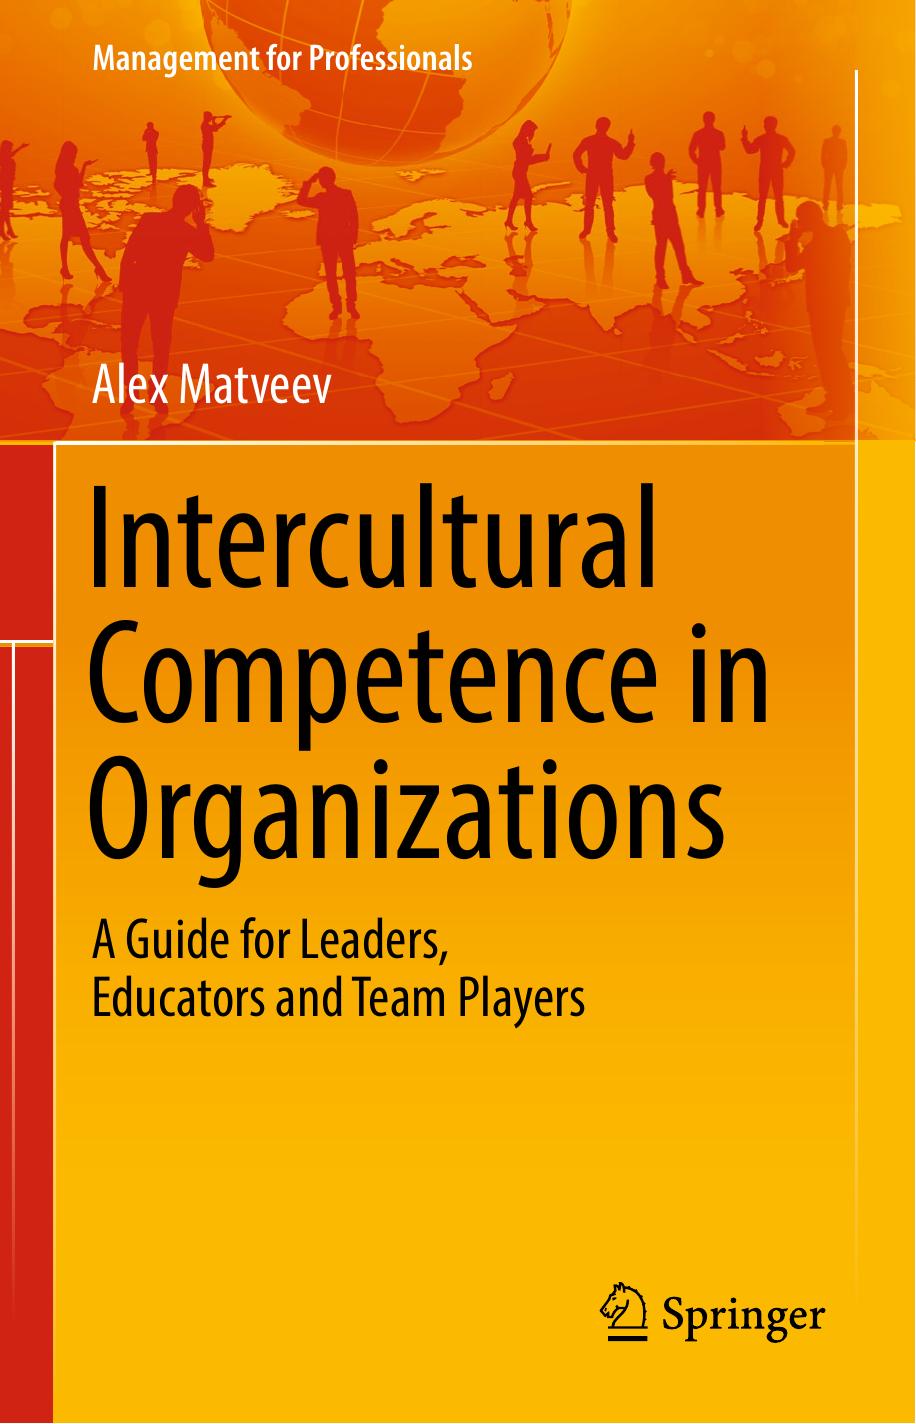 Intercultural Competence in Organizations  A Guide for Leaders, Educators and Team Players ( PDFDrive ) 2017